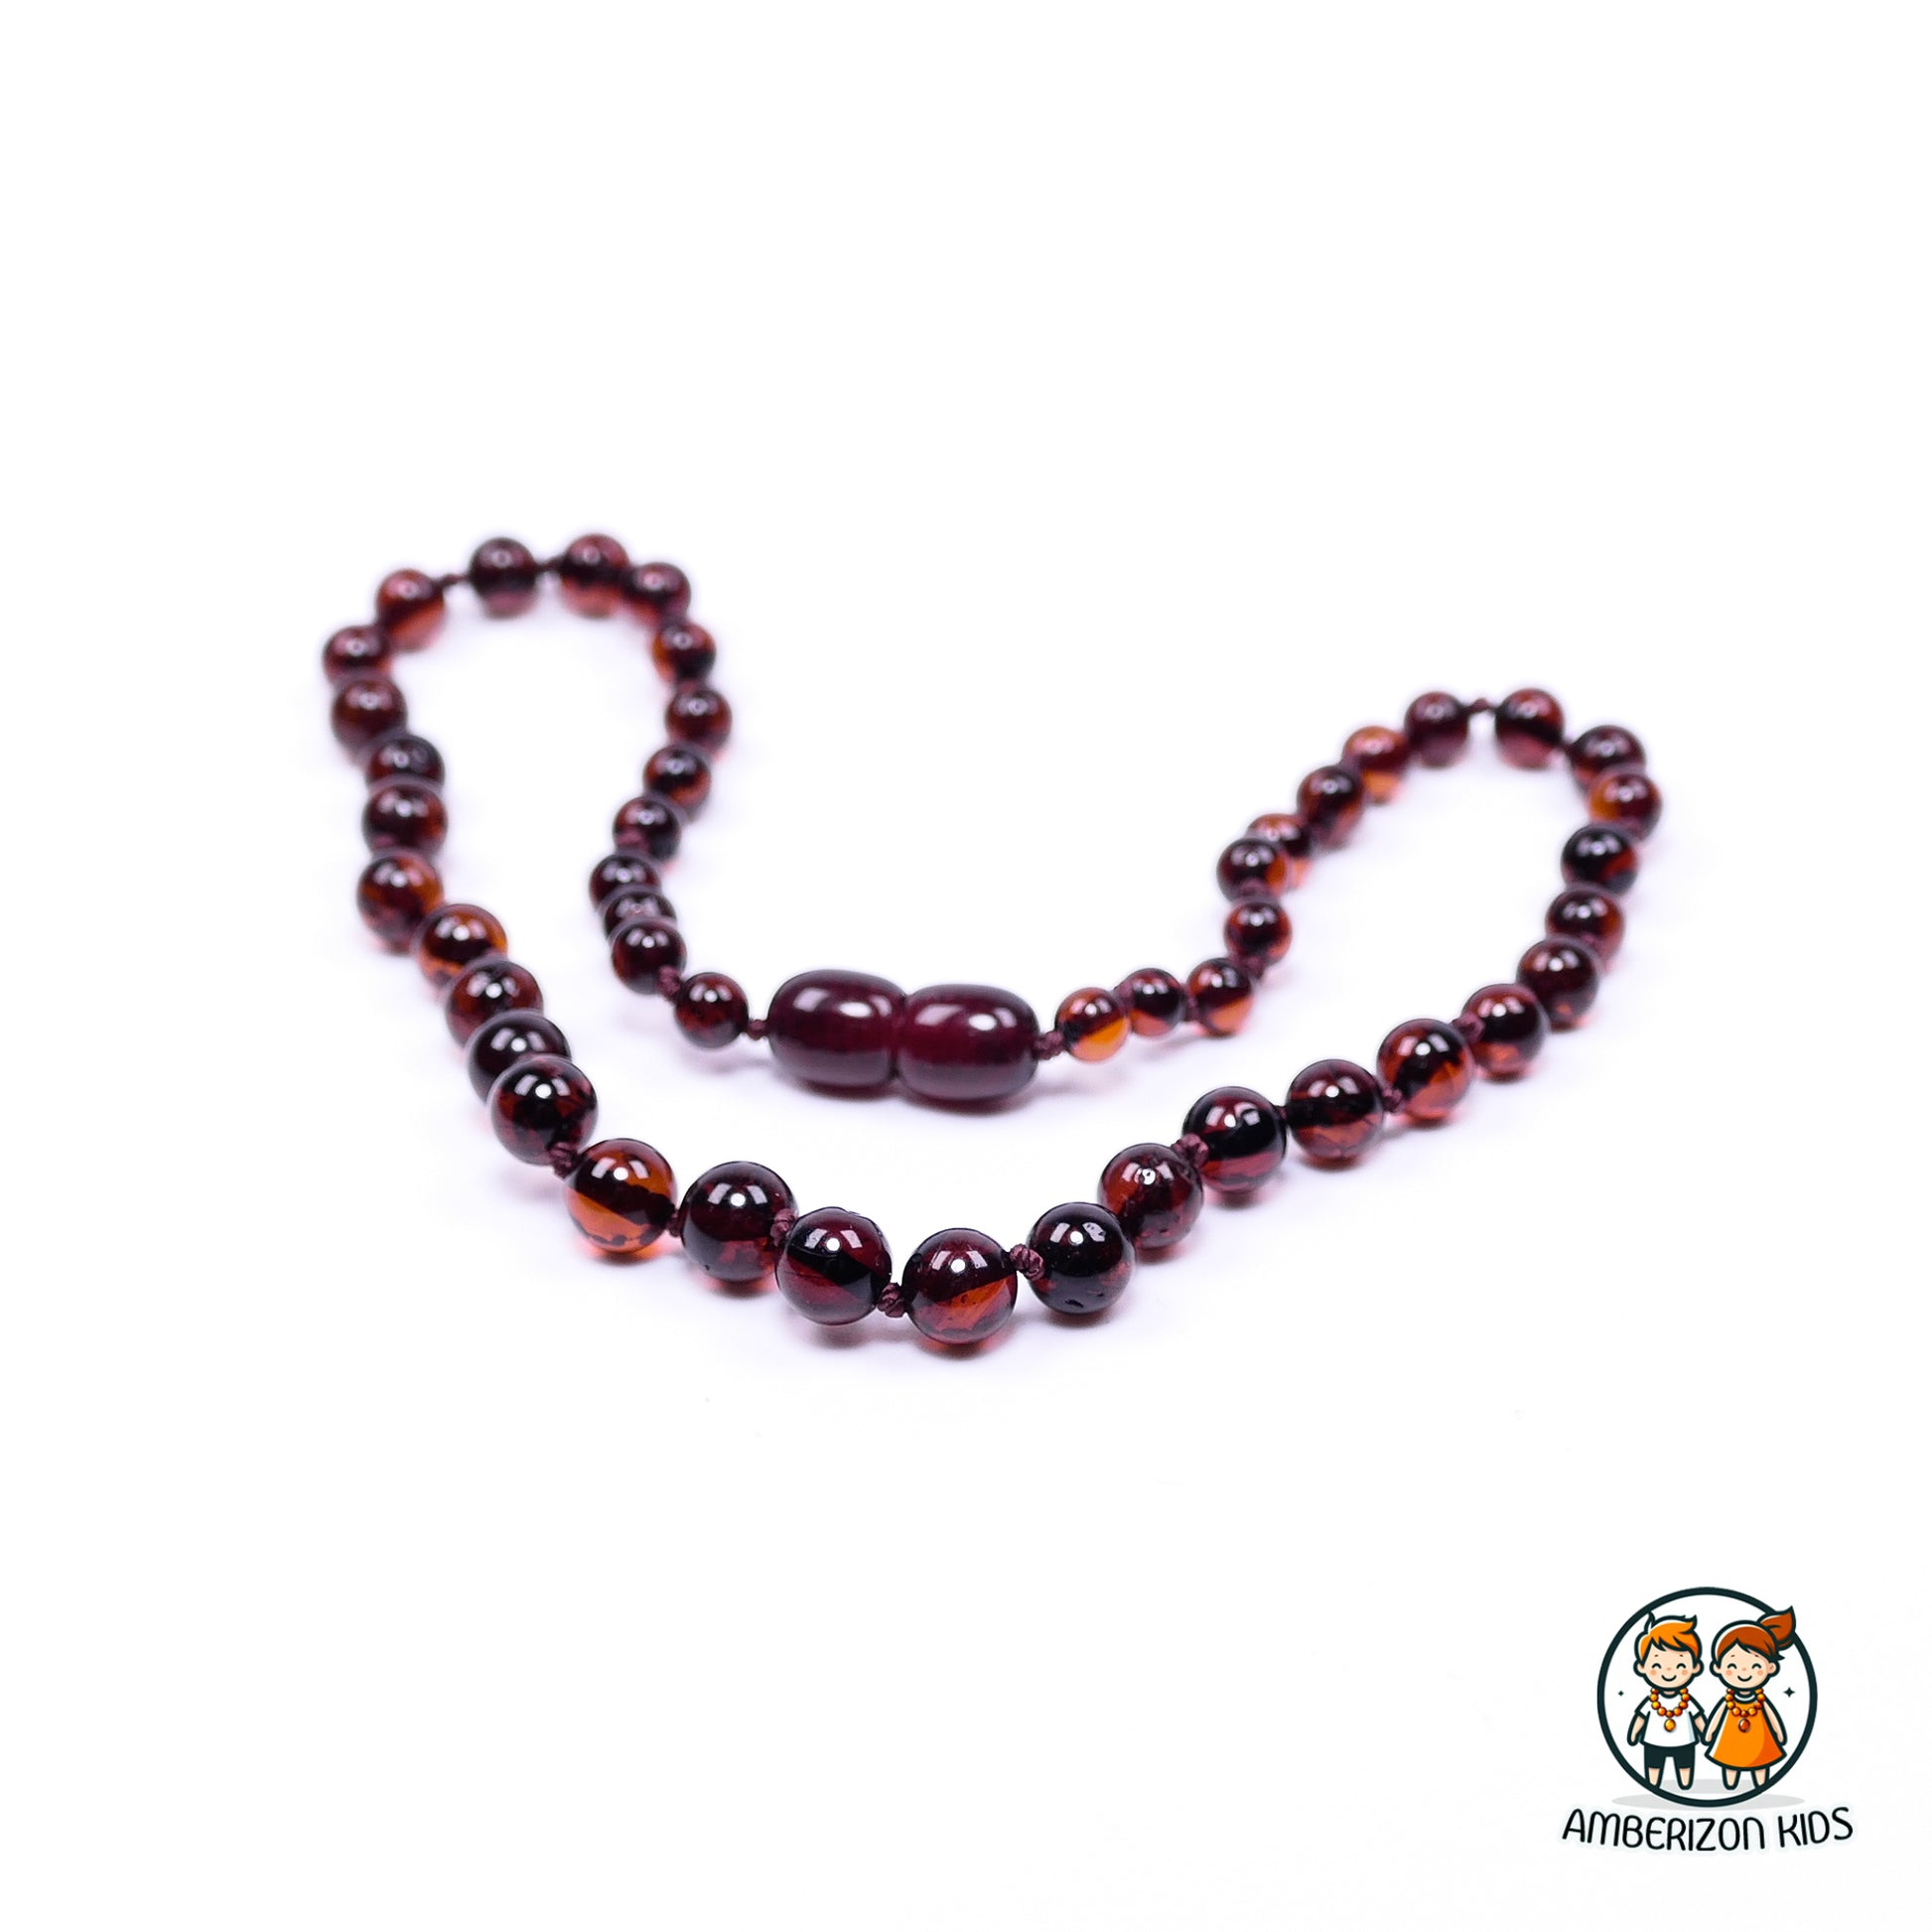 Premium round bead amber jewelry, Amber balls for teething, children's necklace, beads for children.